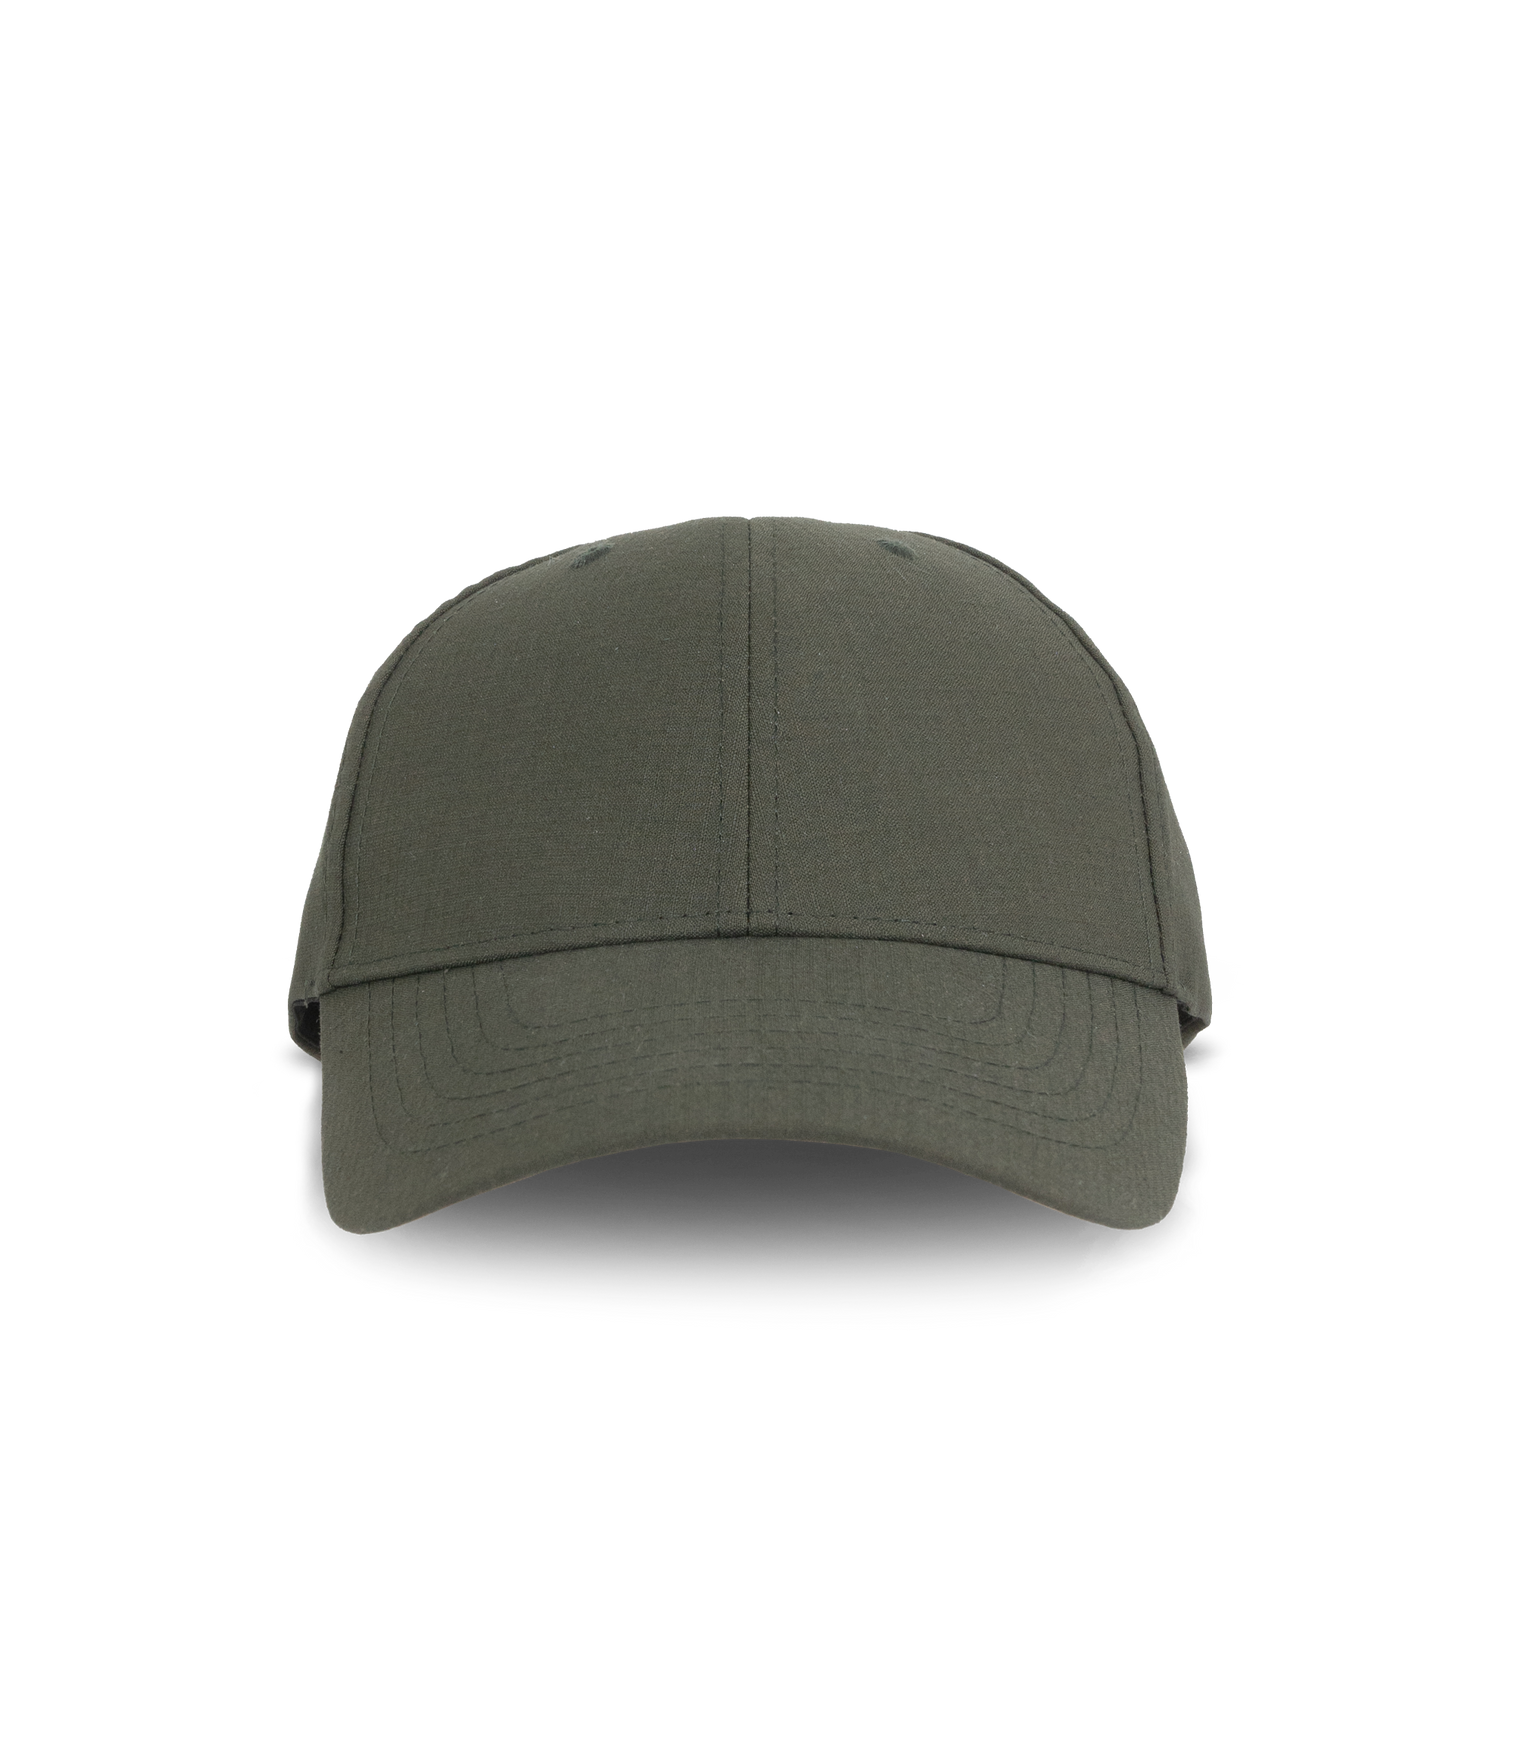 First Tactical FT Flex Hat - Olive Drab